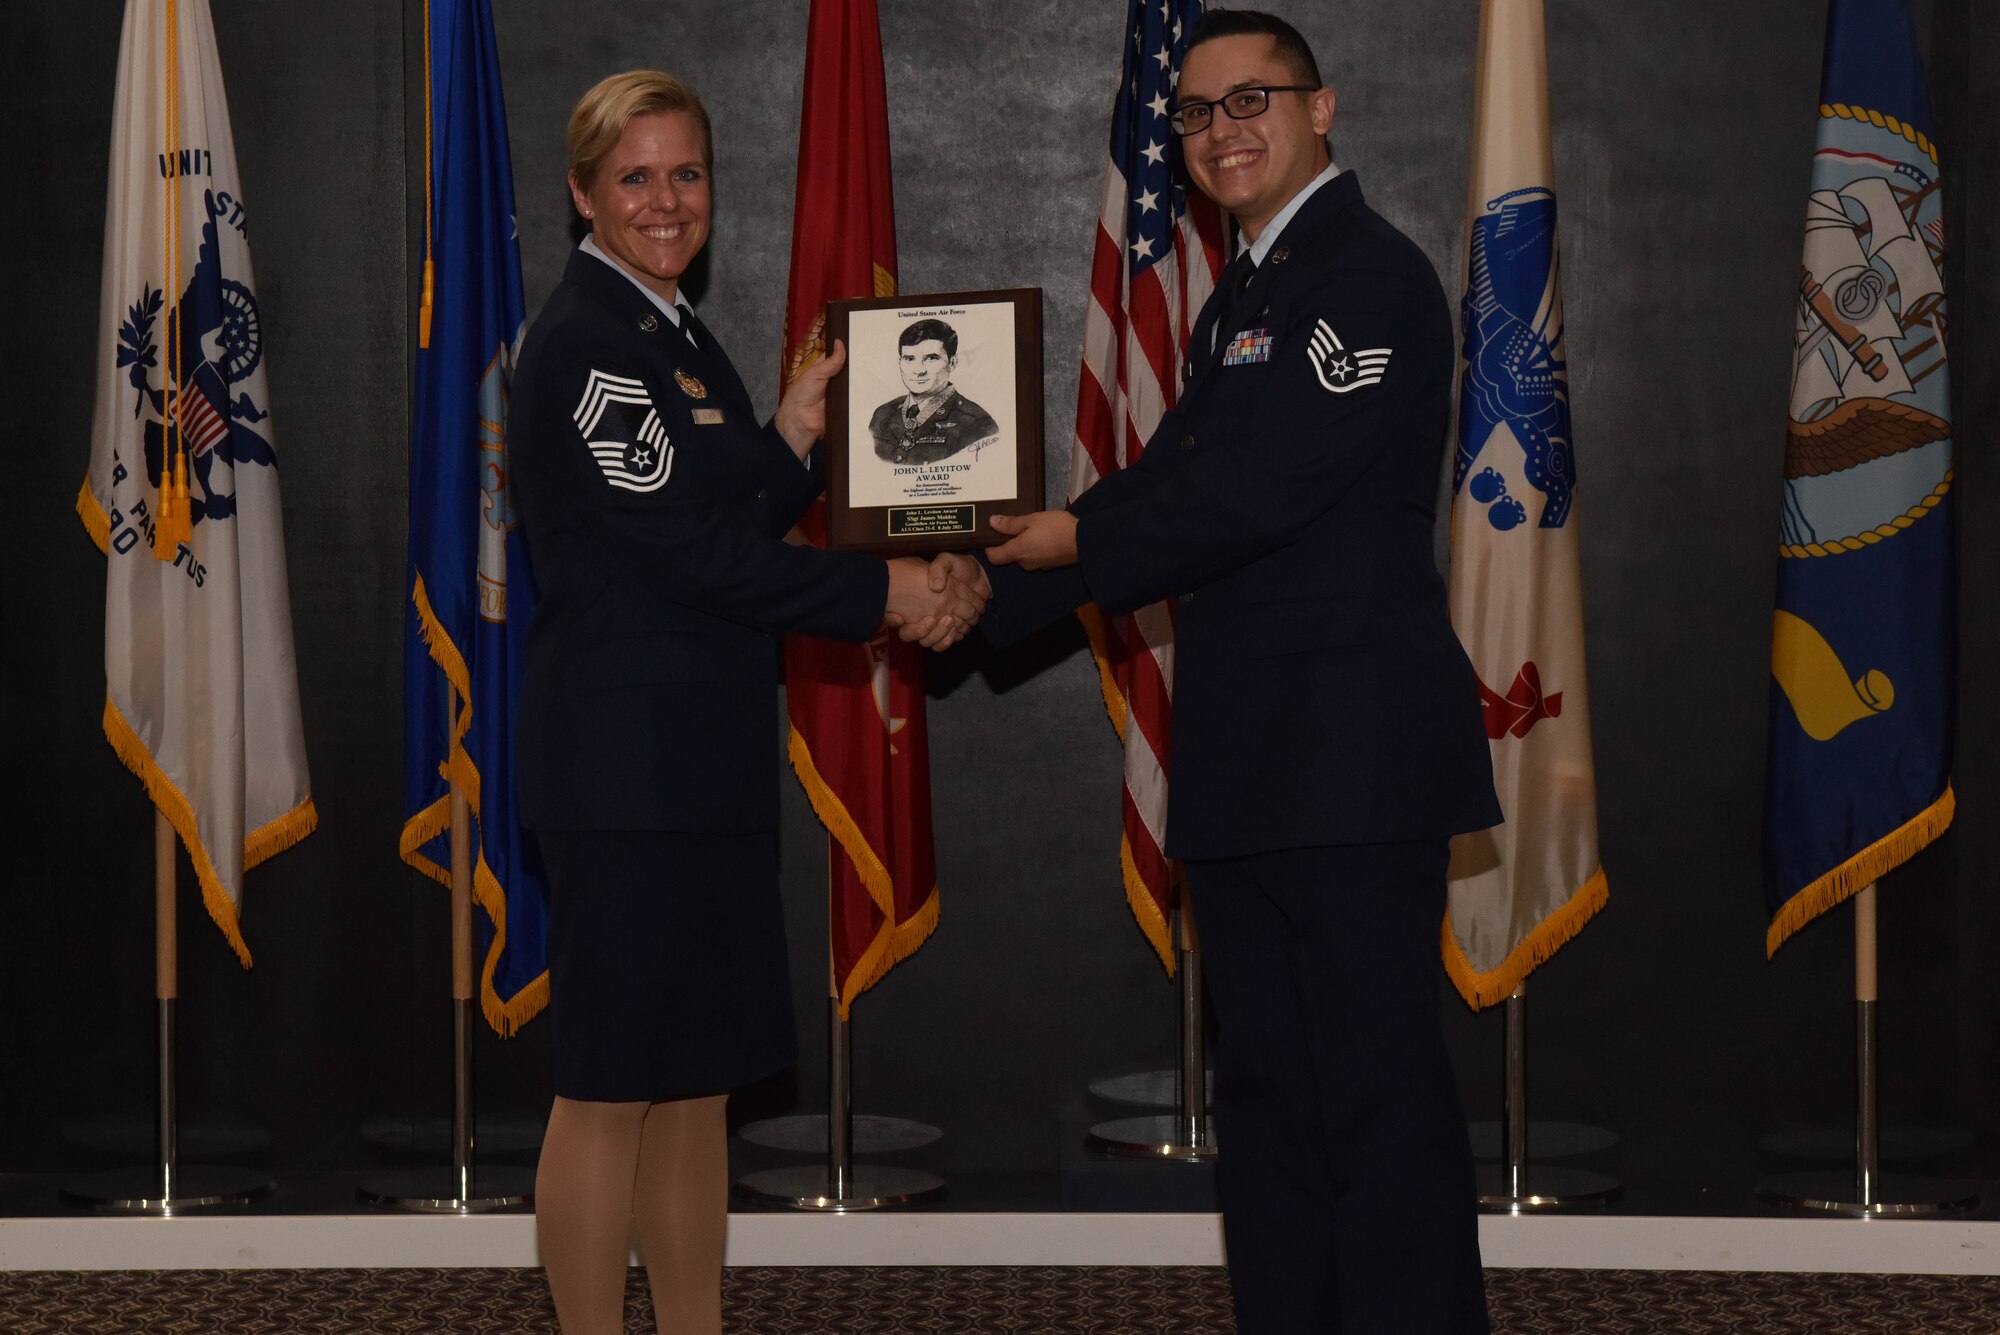 U.S. Air Force Chief Master Sgt. Breana Oliver, 17th Training Group superintendent, presents Staff Sgt. James Molden, 17th Contacting Squadron contract specialist, the John L. Levitow award during Molden’s Airman Leadership School graduation ceremony on Goodfellow Air Force Base, Texas, July 8, 2021. The John L. Levitow award is the highest award possible in professional military education and is based upon all performance tasks, peer stratifications and the capstone exercise. (U.S. Air Force photo by Senior Airman Jermaine Ayers)